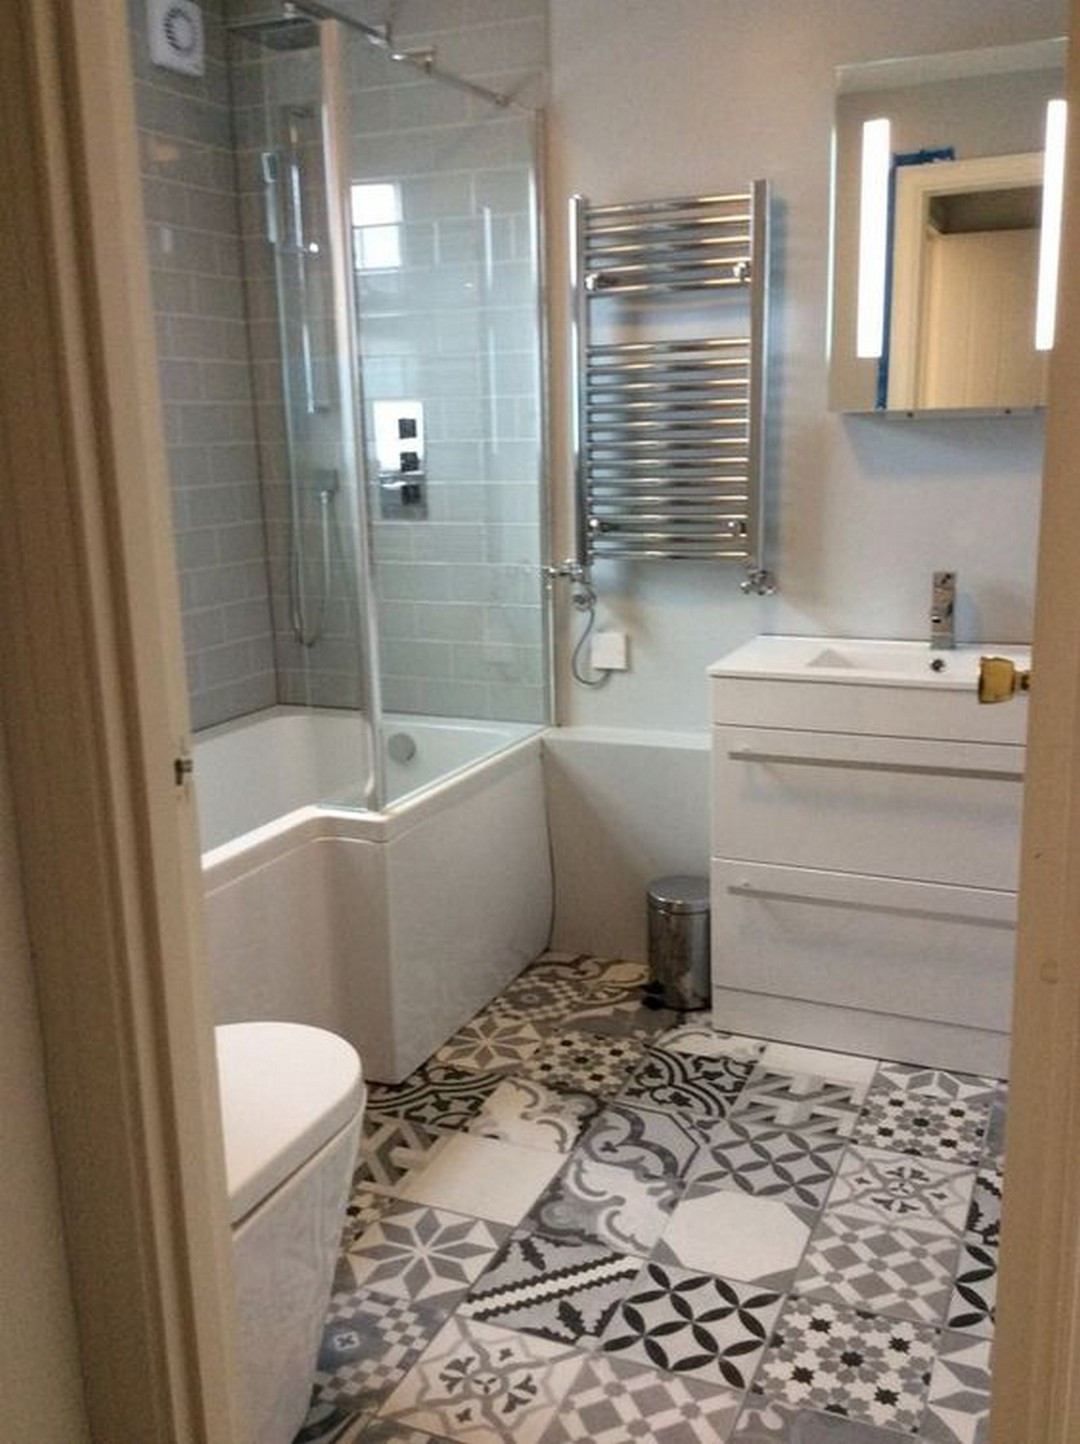 Bathroom Shower Tile Ideas
 Style up your Ordinary Bathroom with These Spanish Tile